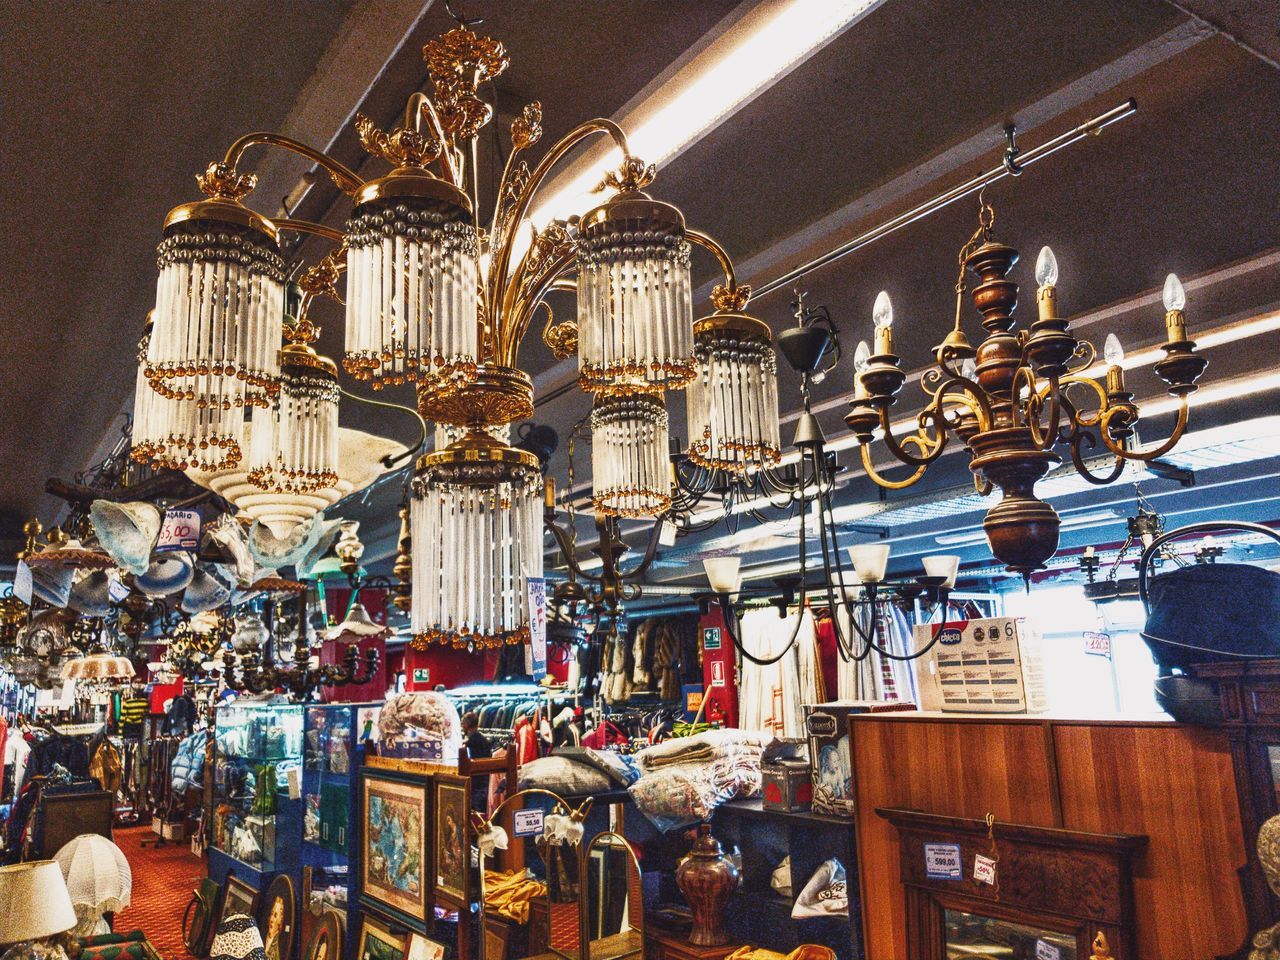 LOW ANGLE VIEW OF ILLUMINATED LANTERNS HANGING IN STORE